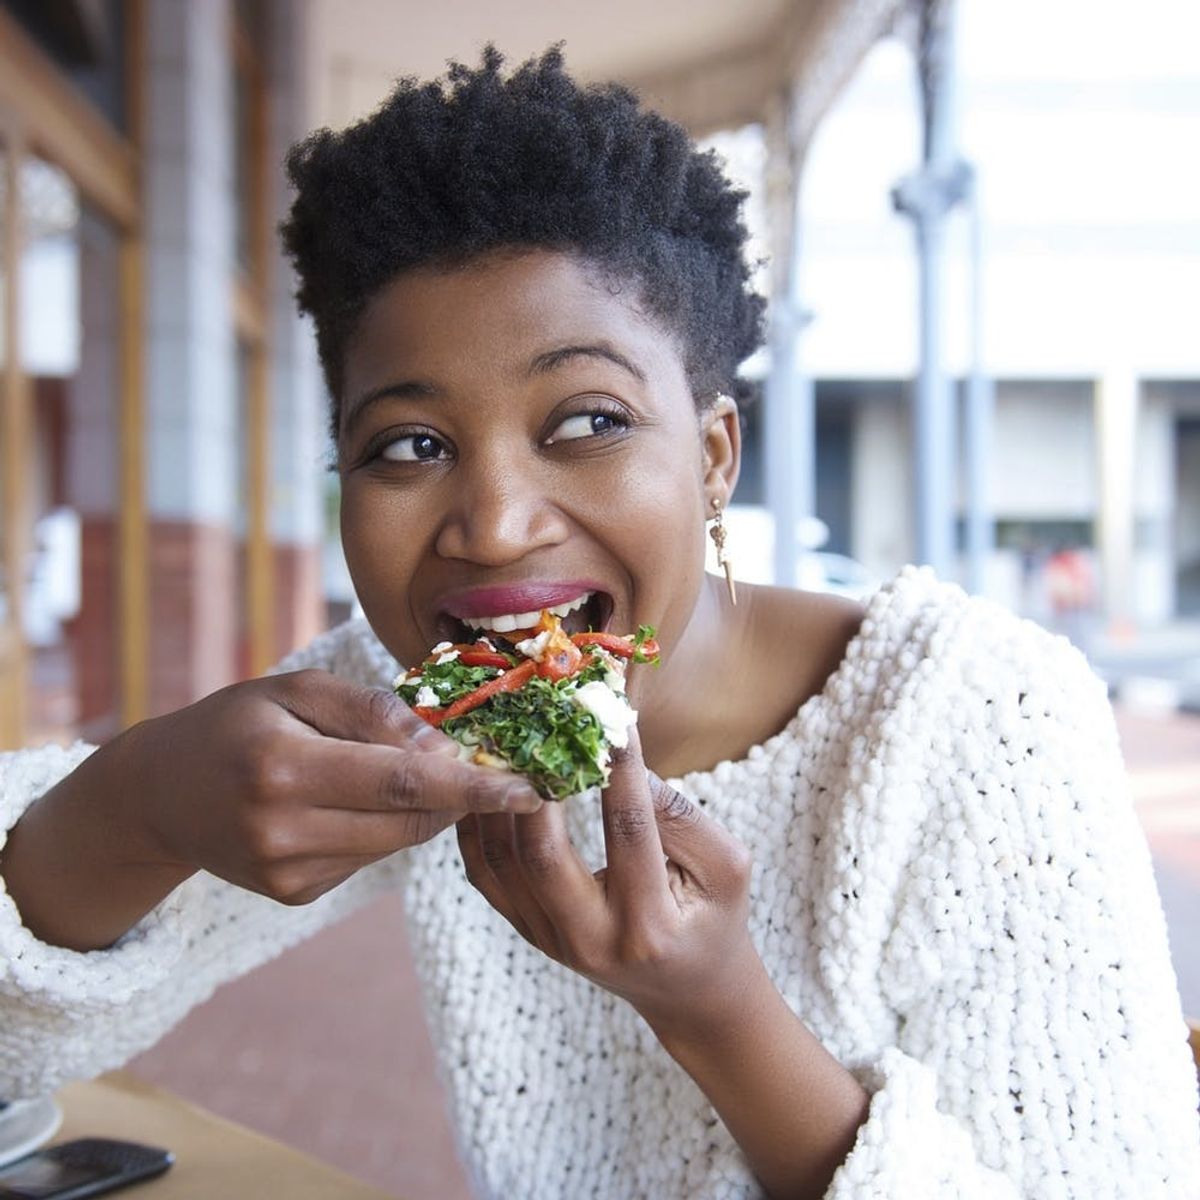 10 Ways to Be a More Mindful Eater